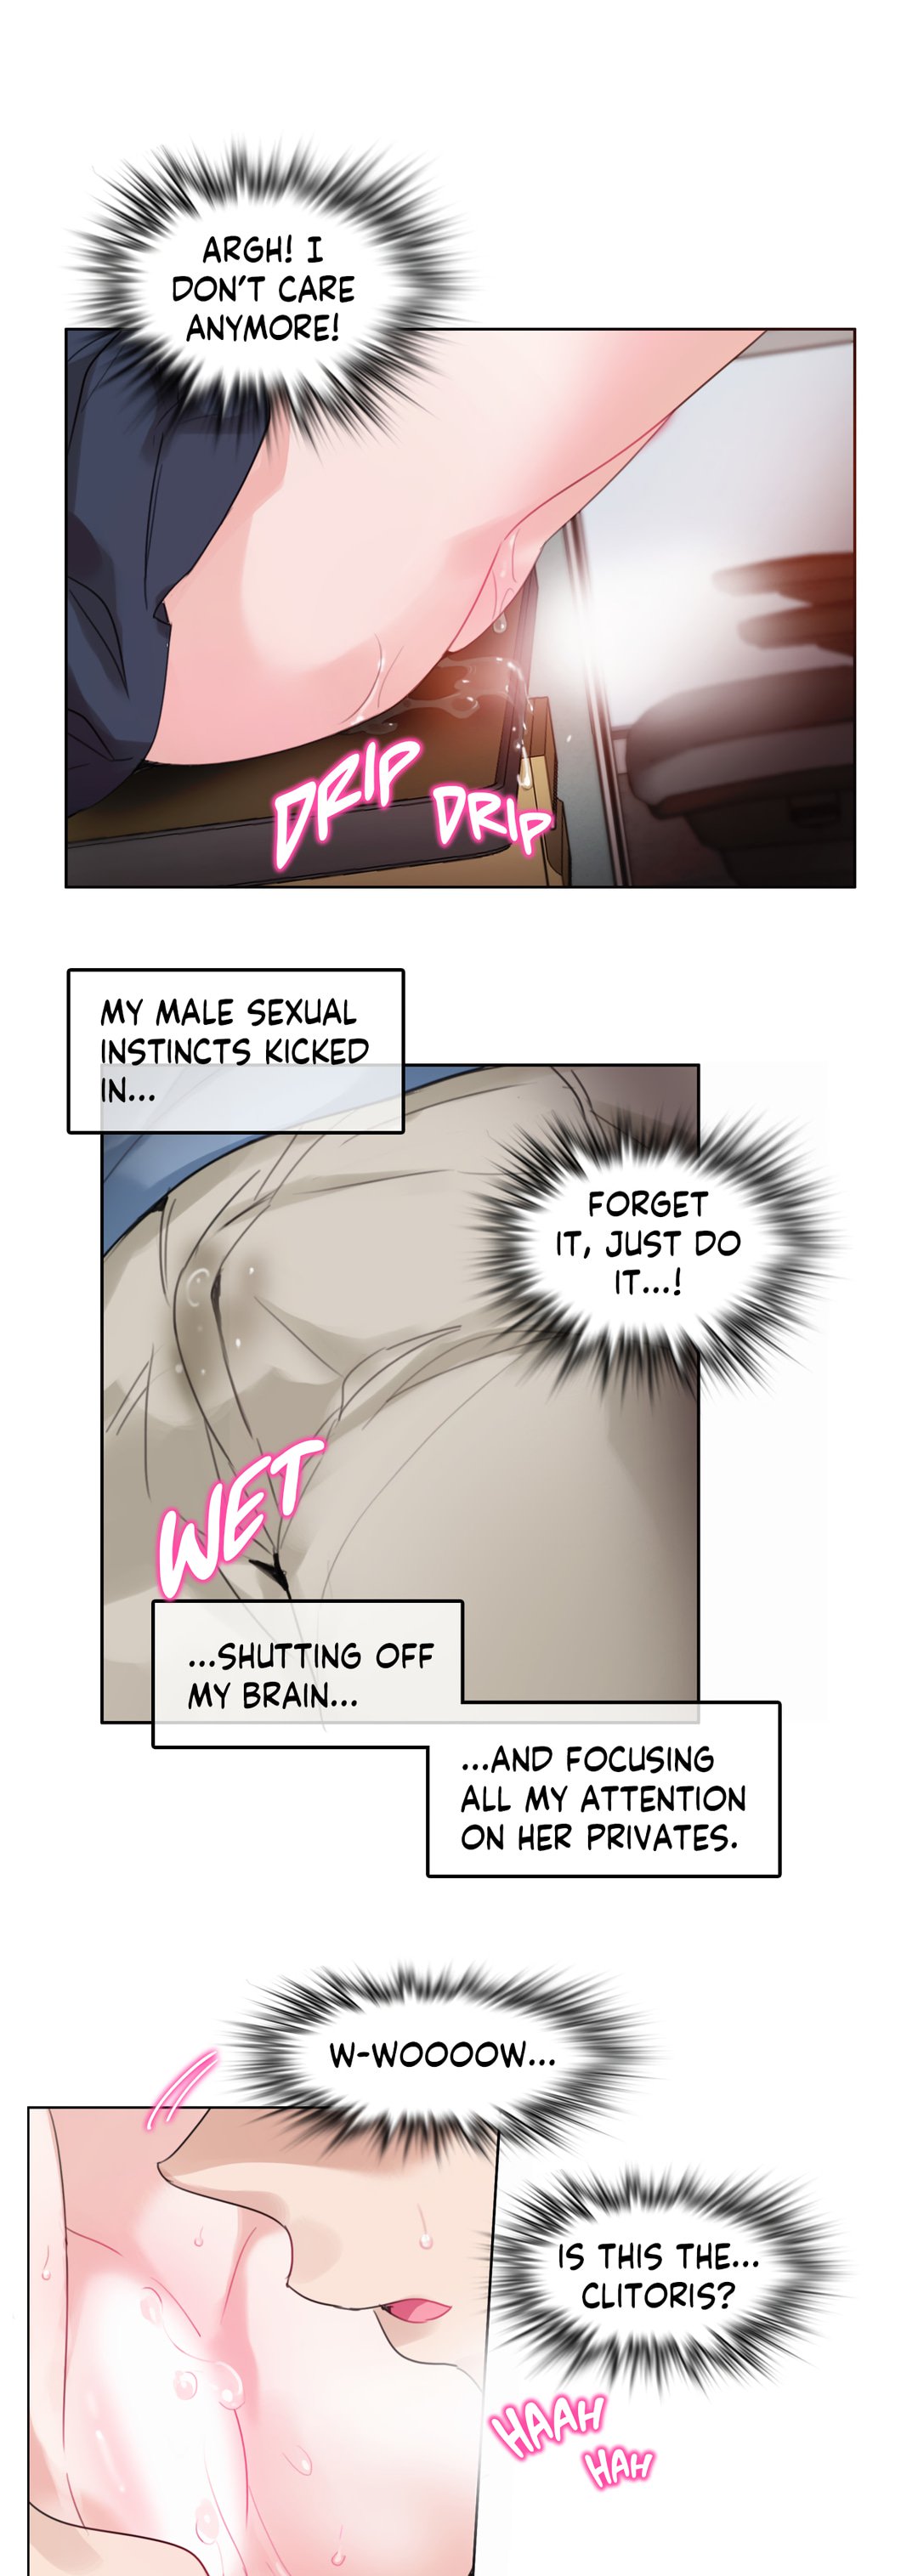 A Pervert's Daily Life Ch.24